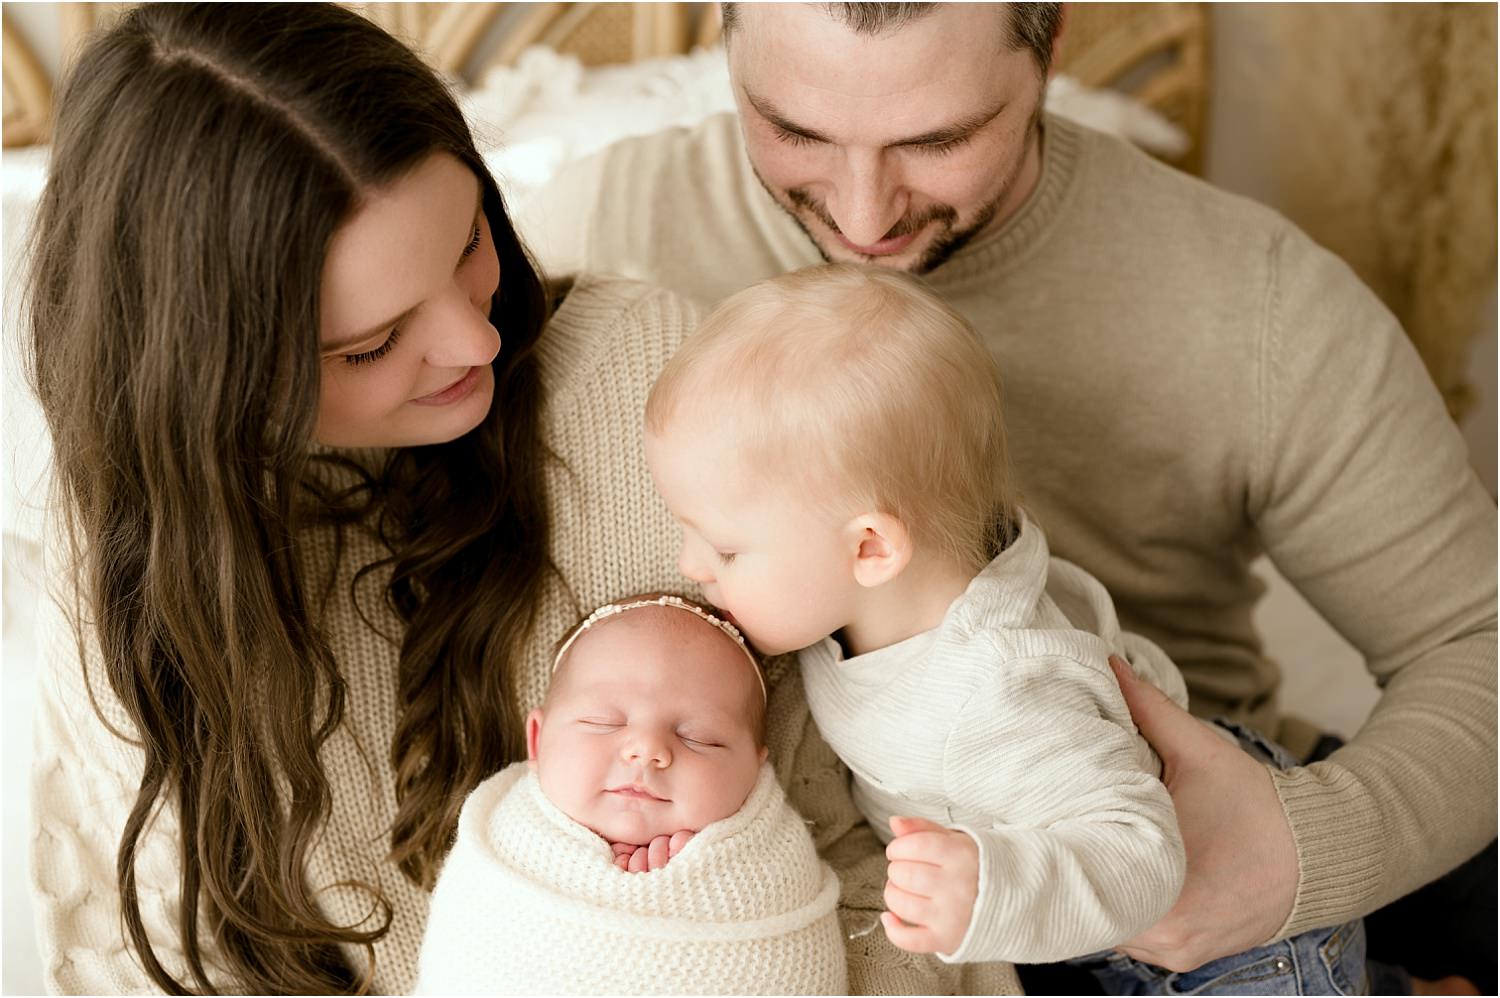 Including Family in Newborn Sessions